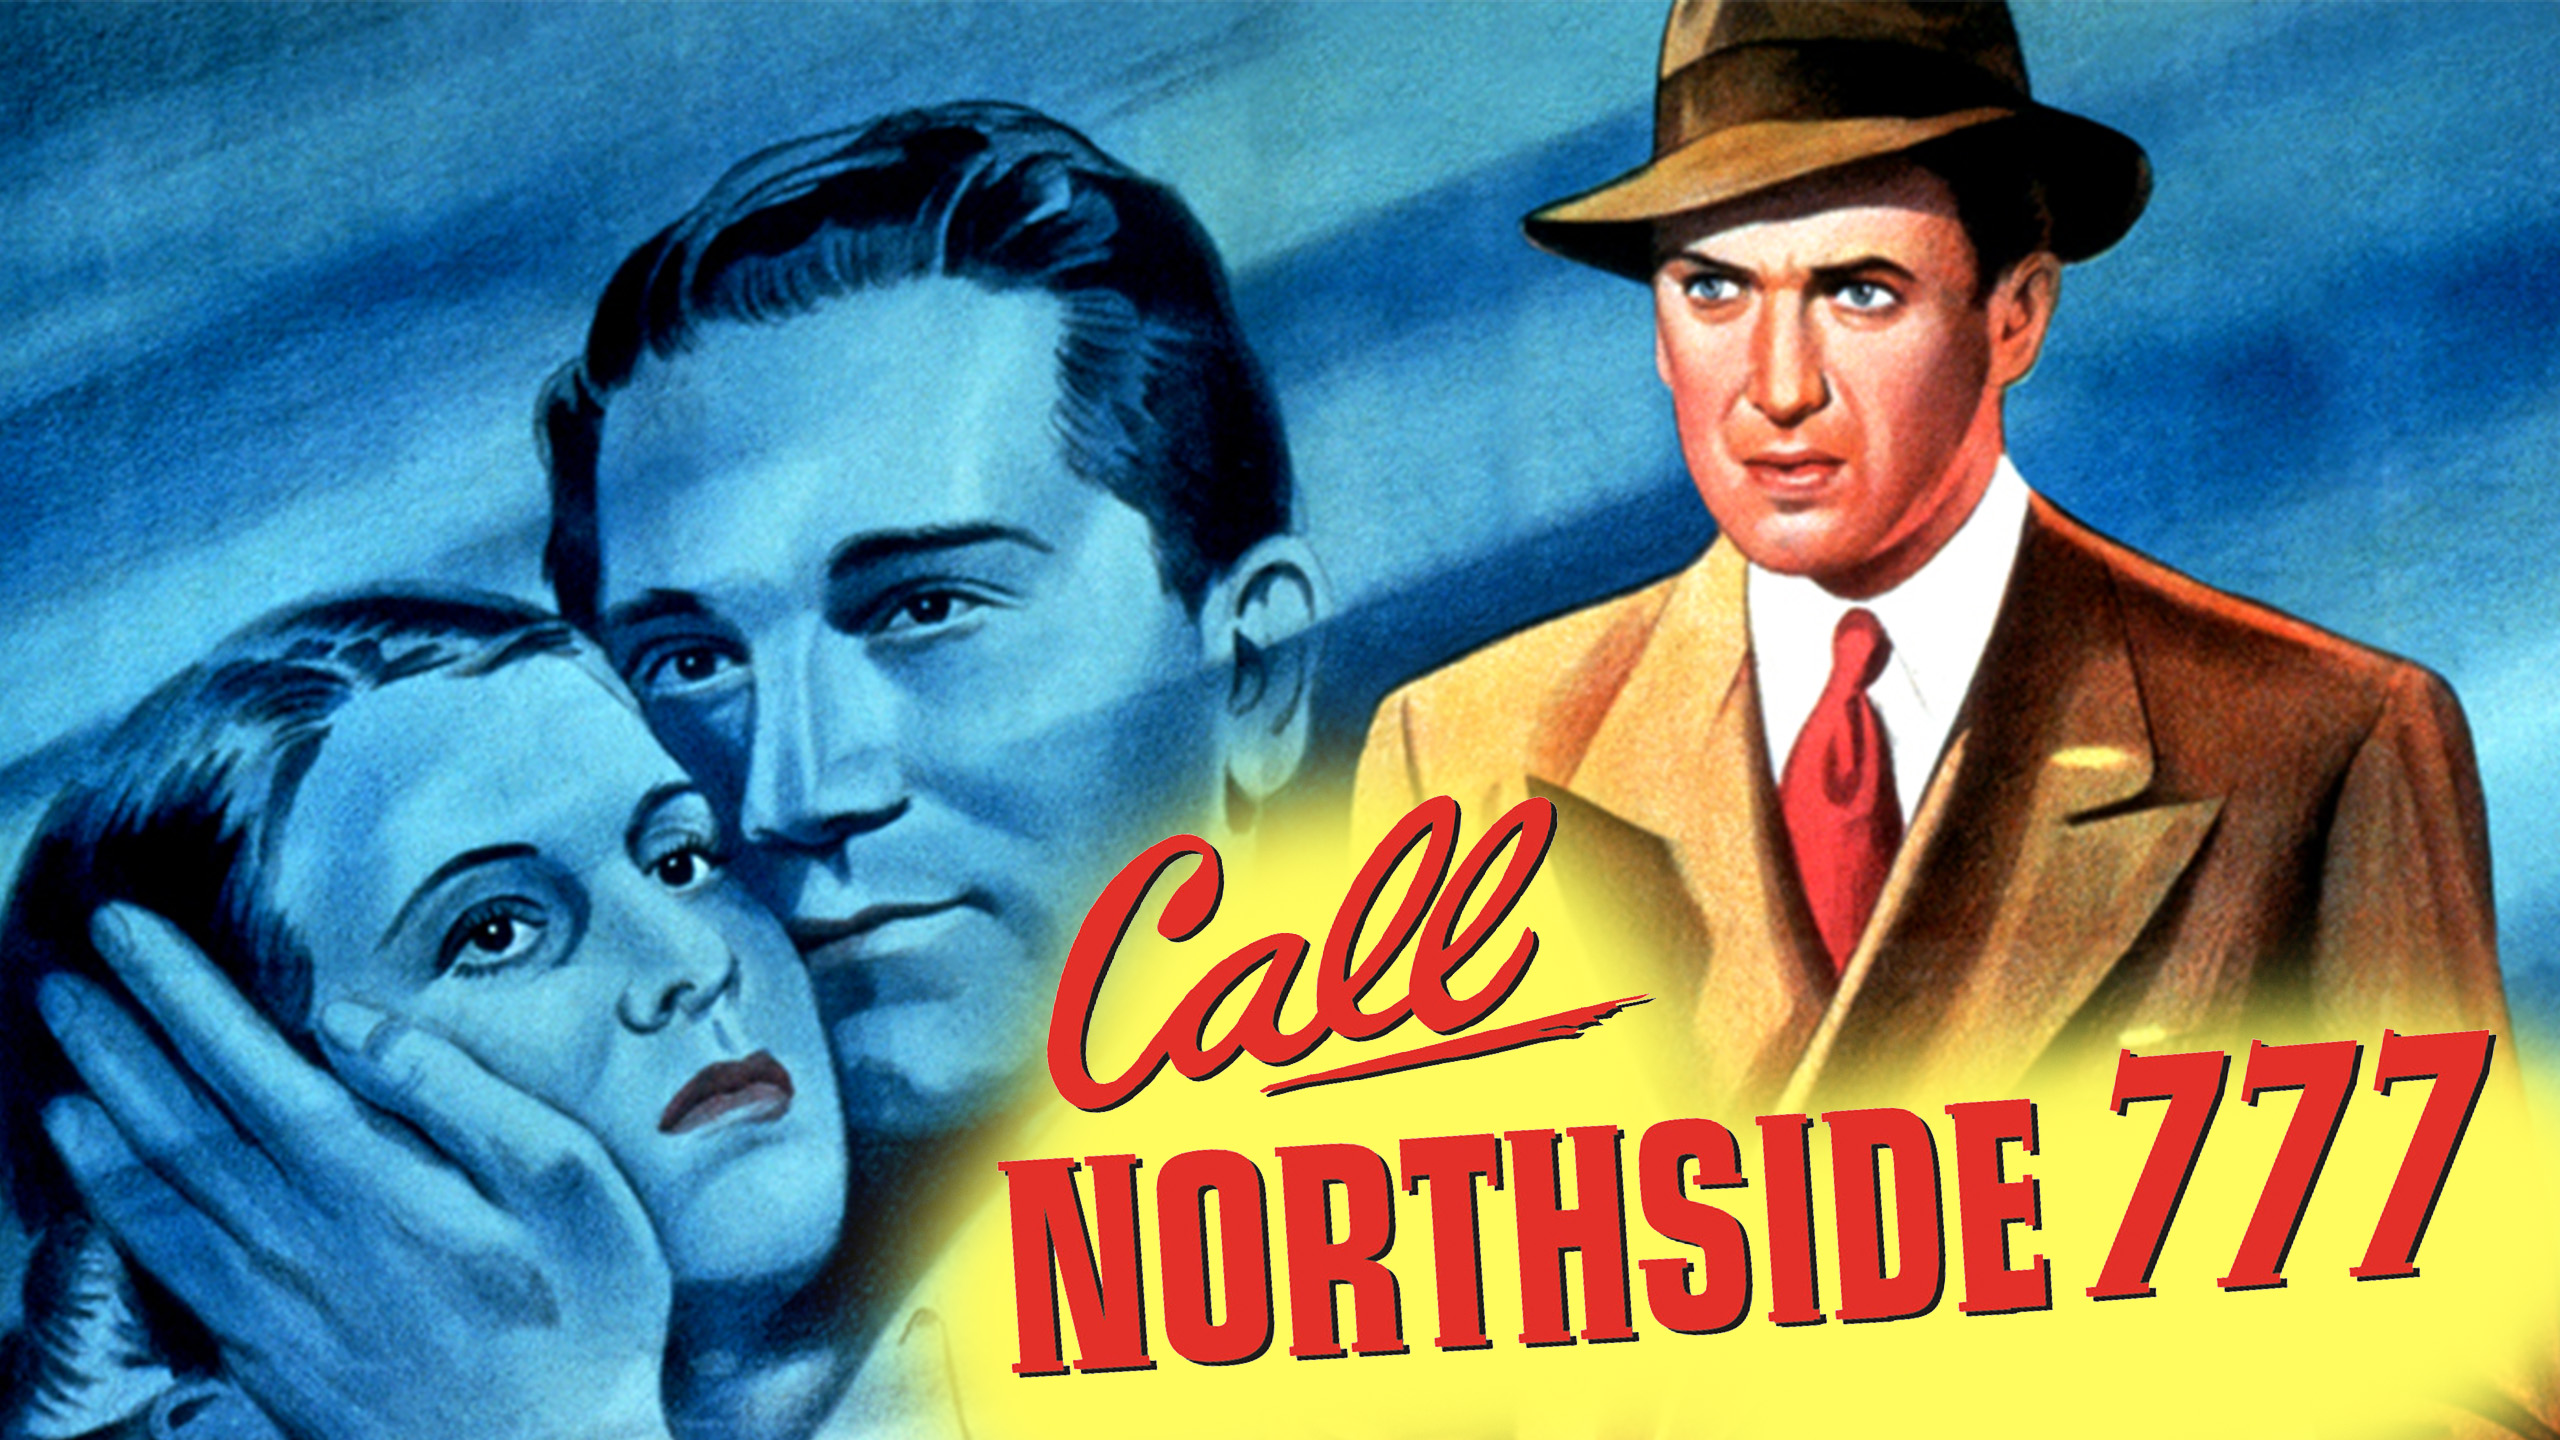 Call Northside 777: A love note to newspapers